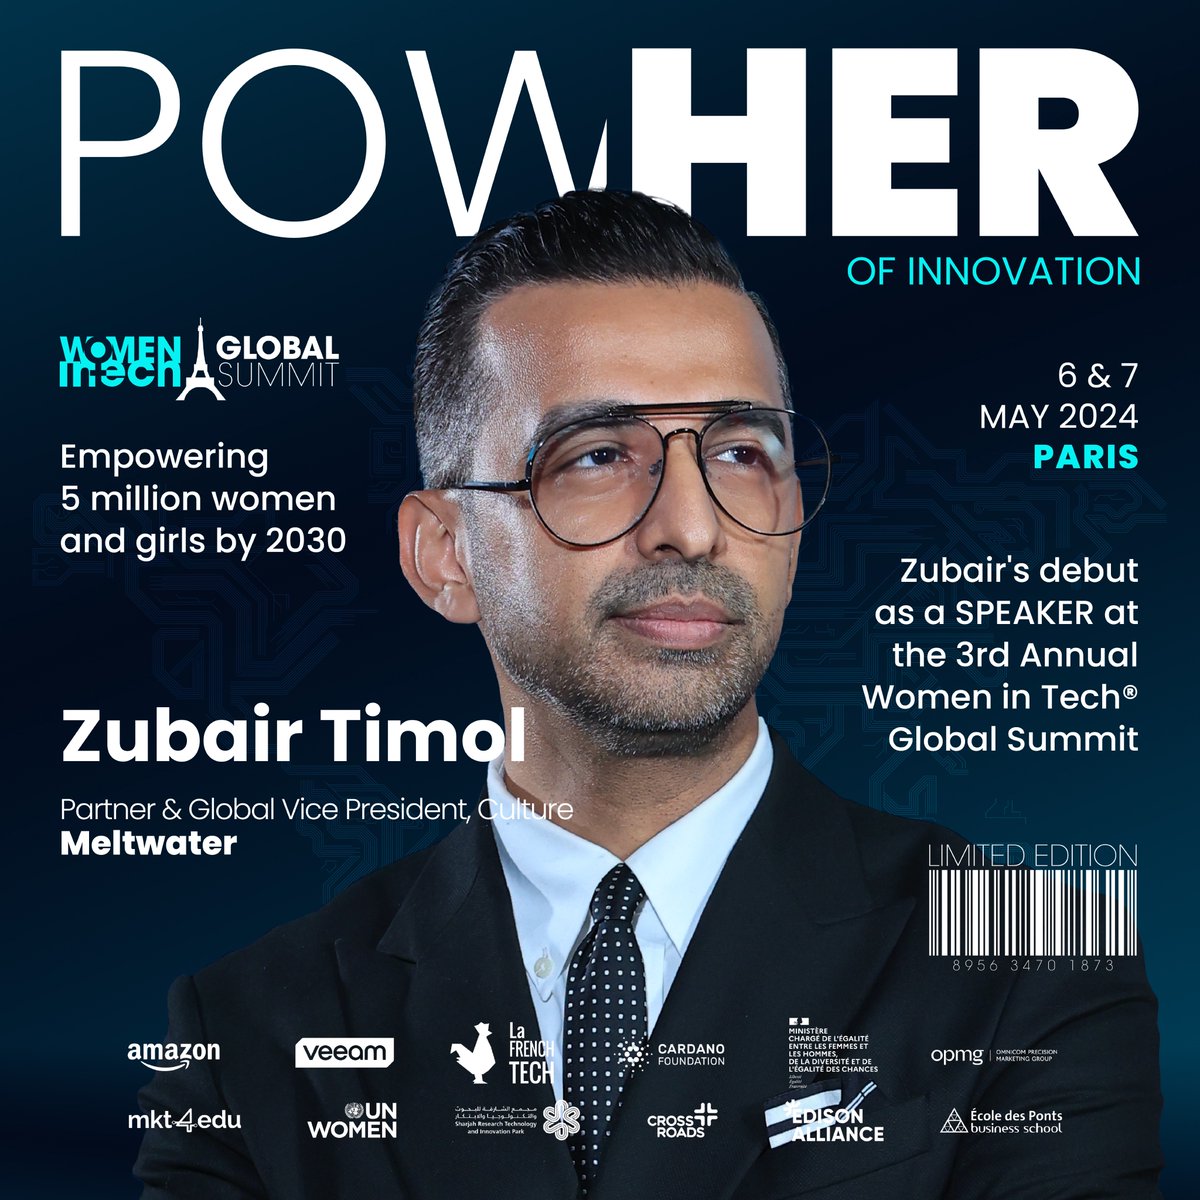 🎉Join us at the Women in Tech® Global Summit, where we’ll be unpacking and admiring the PowHER of Innovation as this year’s theme! Meet our speaker Zubair Timol, Partner & Global Vice President, Culture at Meltwater. Link: lnkd.in/dJrvNNJu #WITGS24 #PowHER